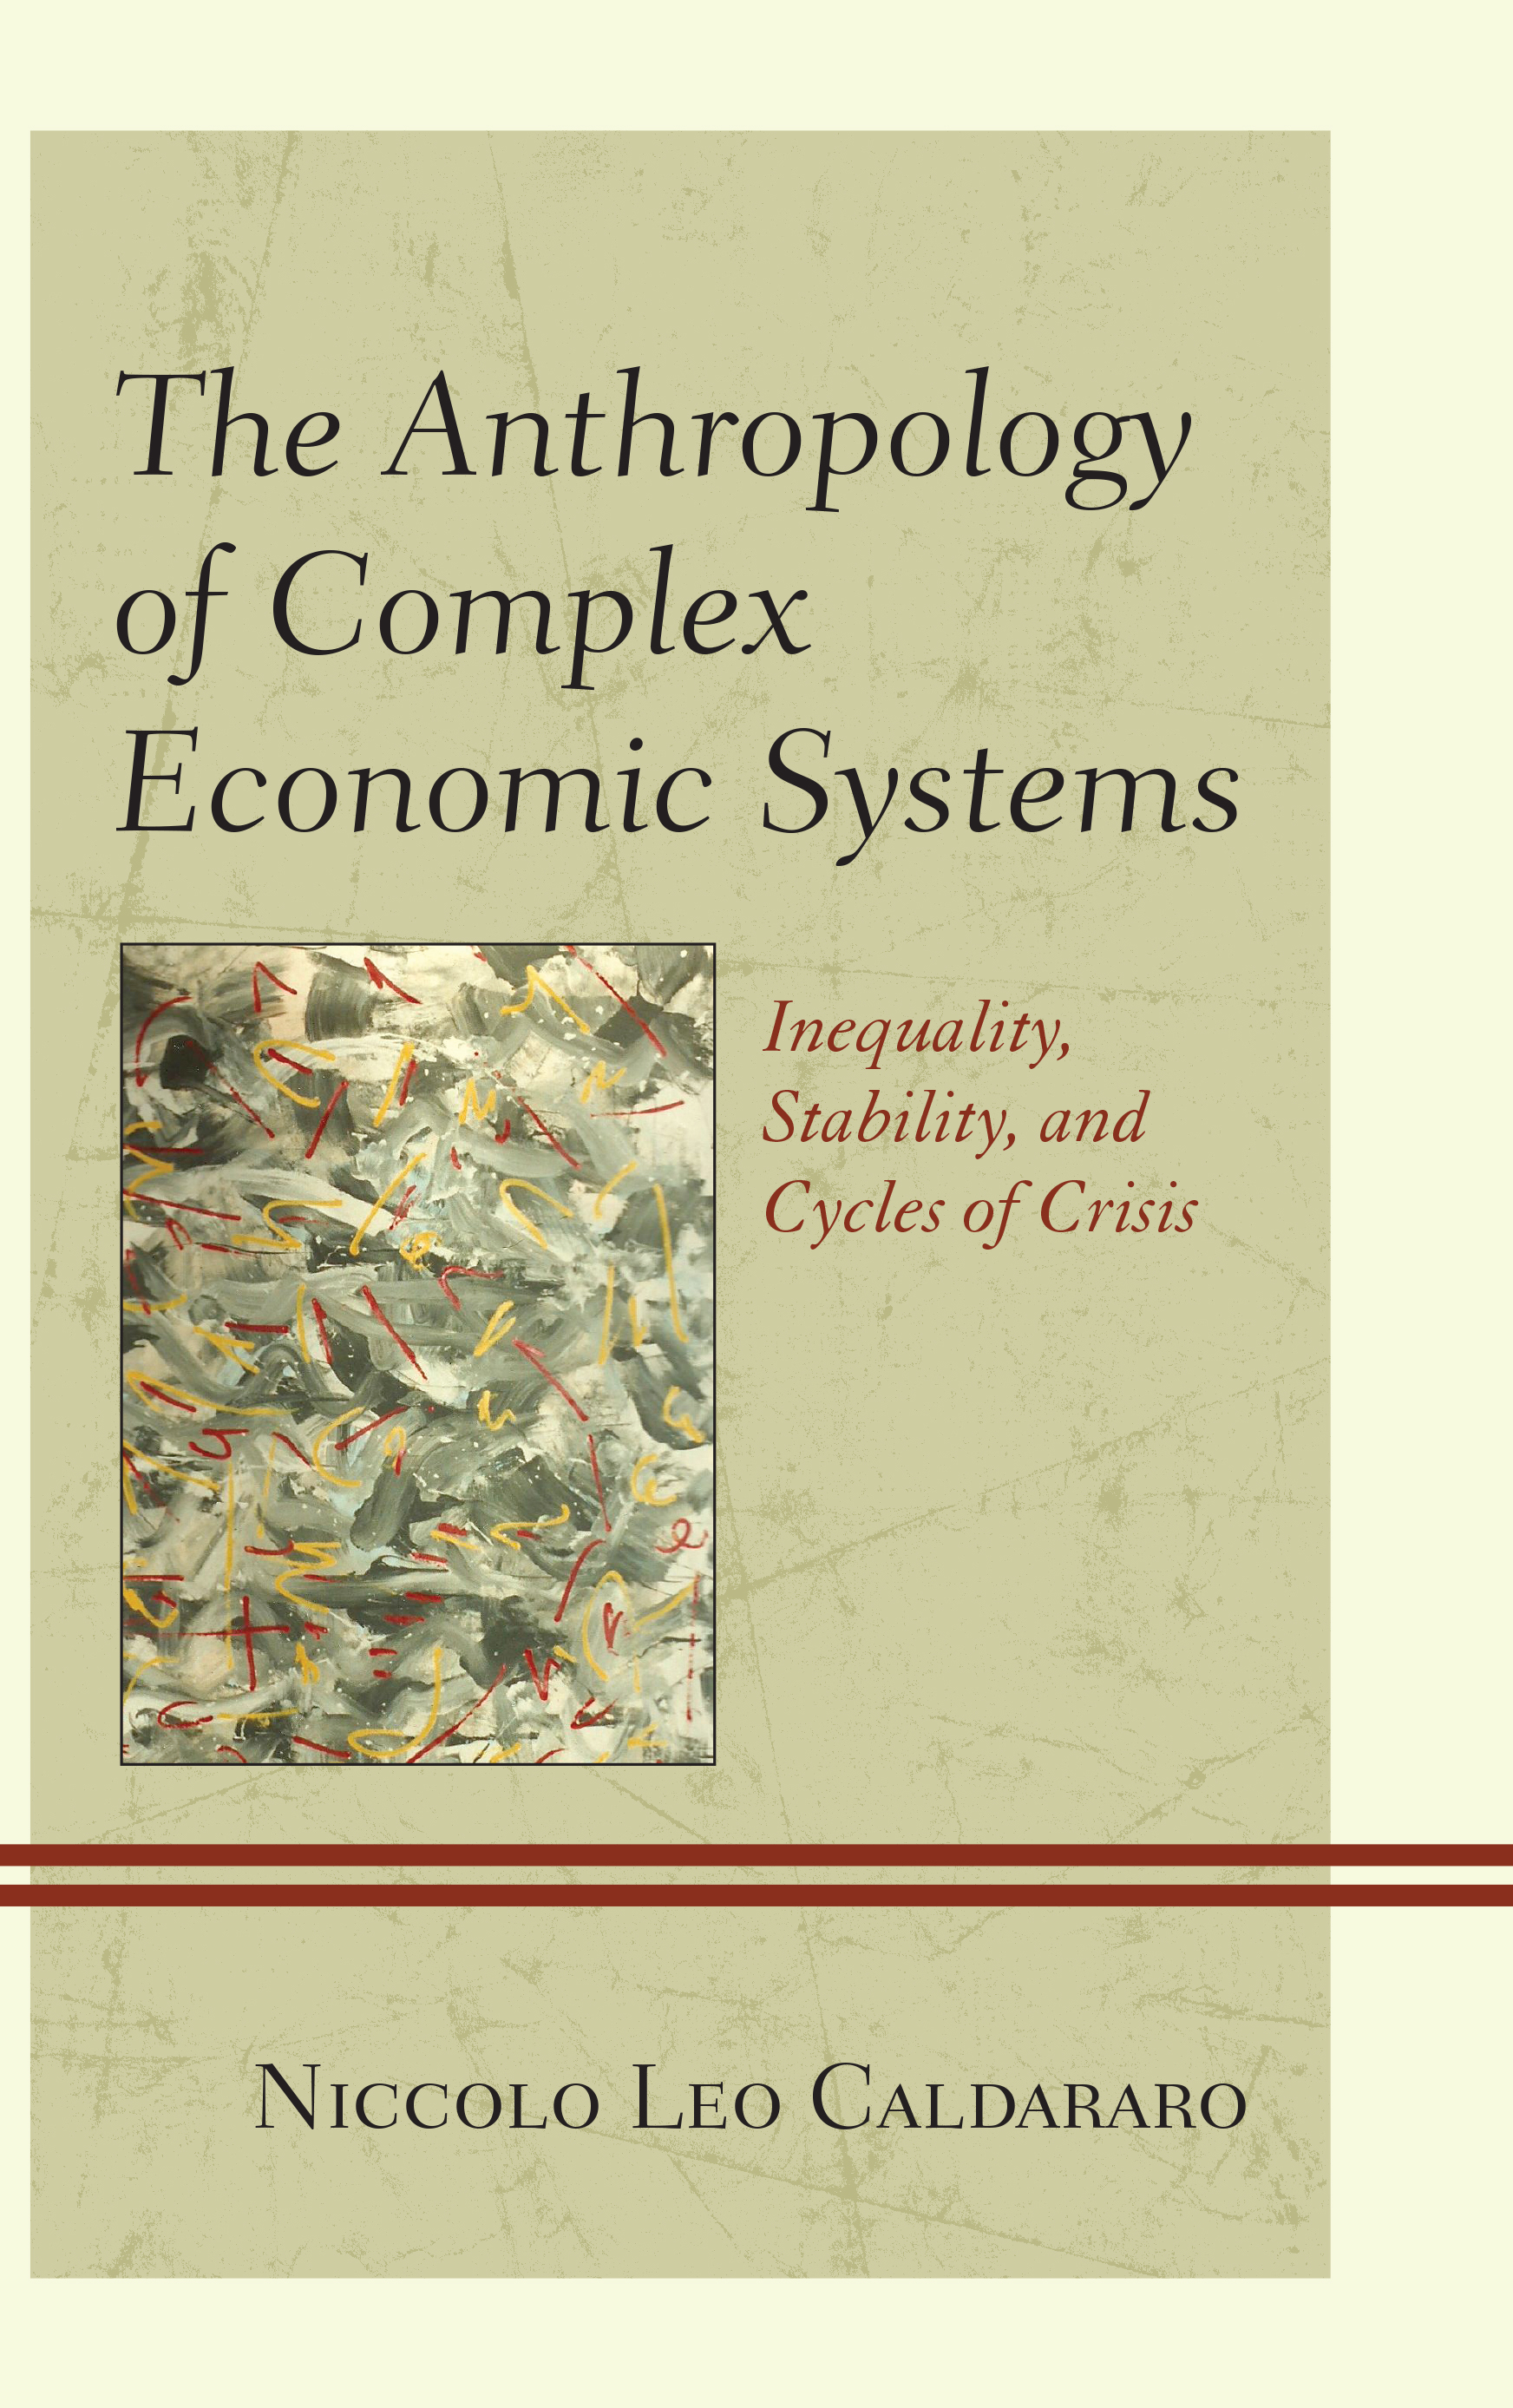 The Anthropology of Complex Economic Systems: Inequality, Stability, and Cycles of Crisis